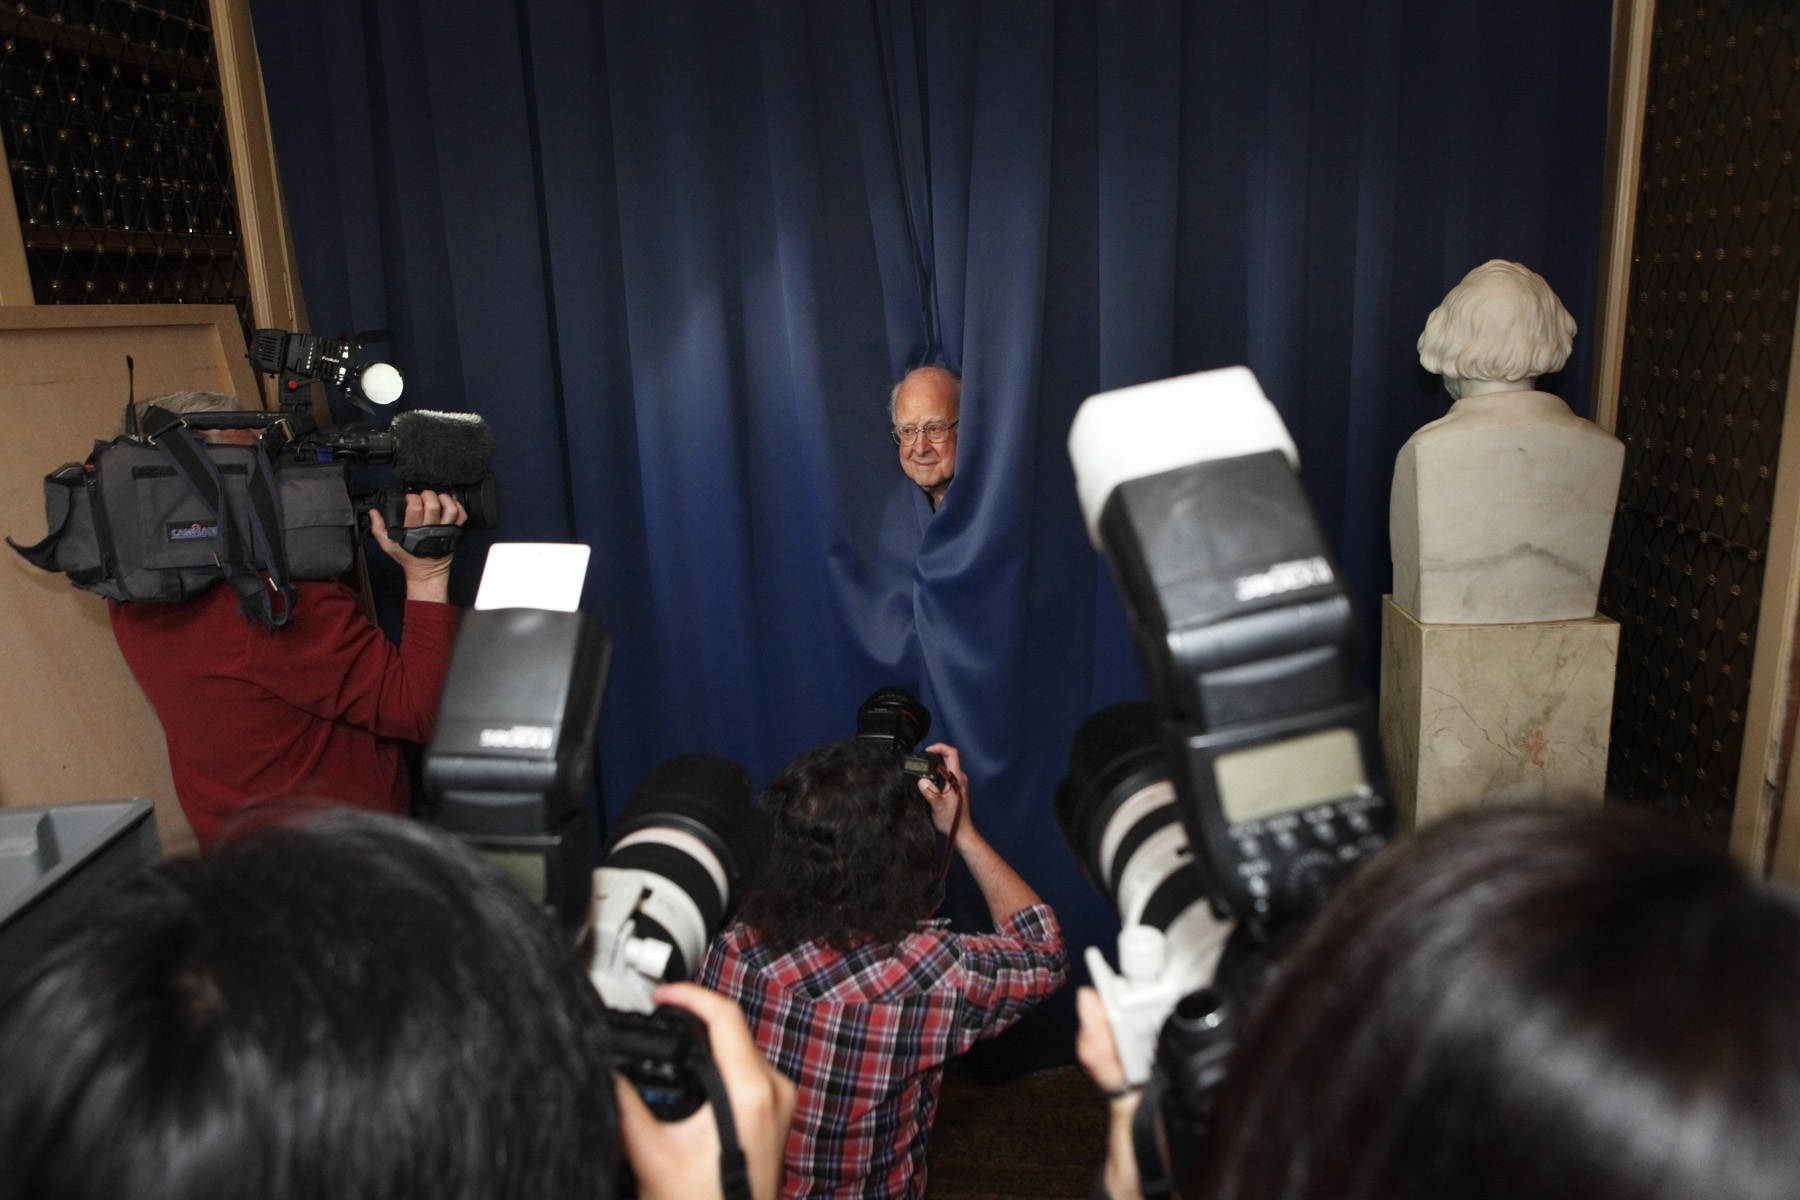 Professor Peter Higgs at the news conference at the University of Edinburgh. Image copyright Graham Clark.